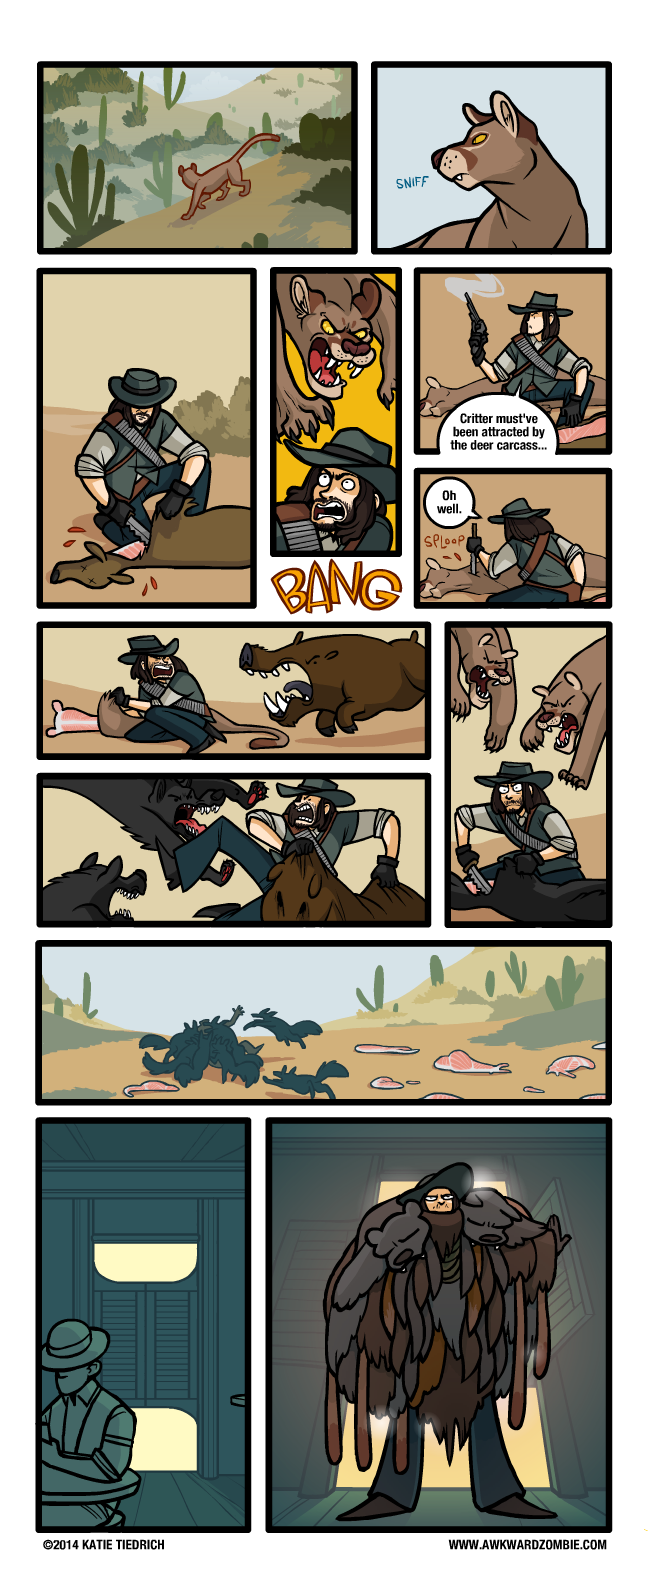 RDR awesome game w/ flawless logic